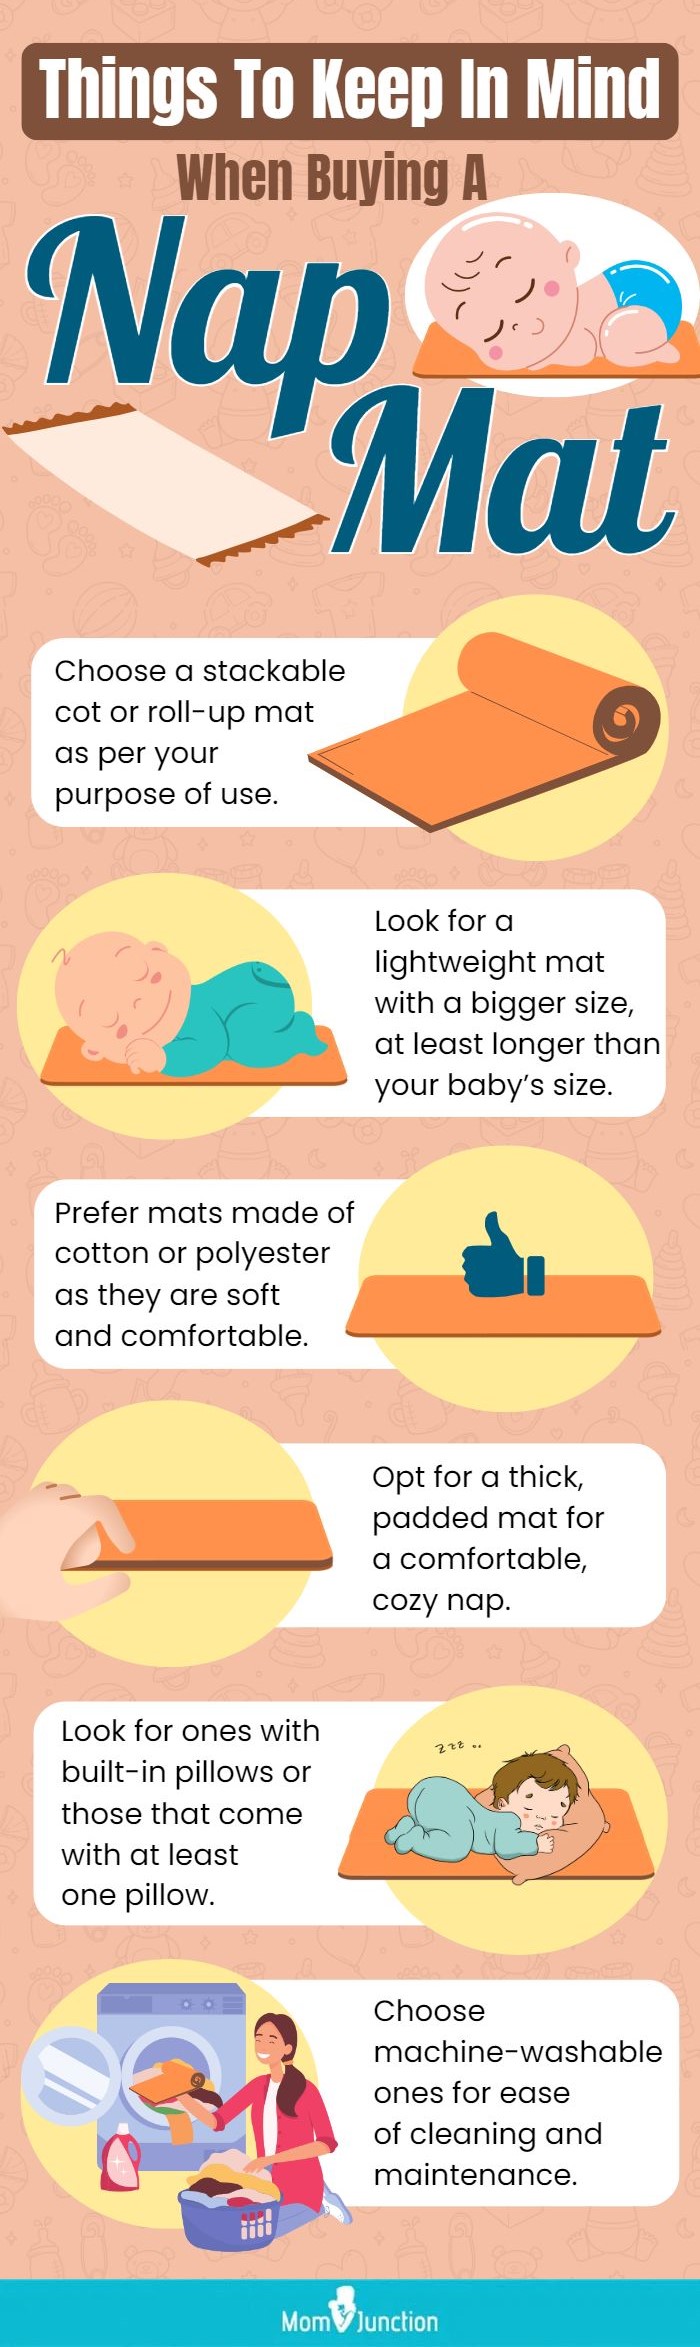 Things To Keep In Mind When Buying A Nap Mat (infographic)